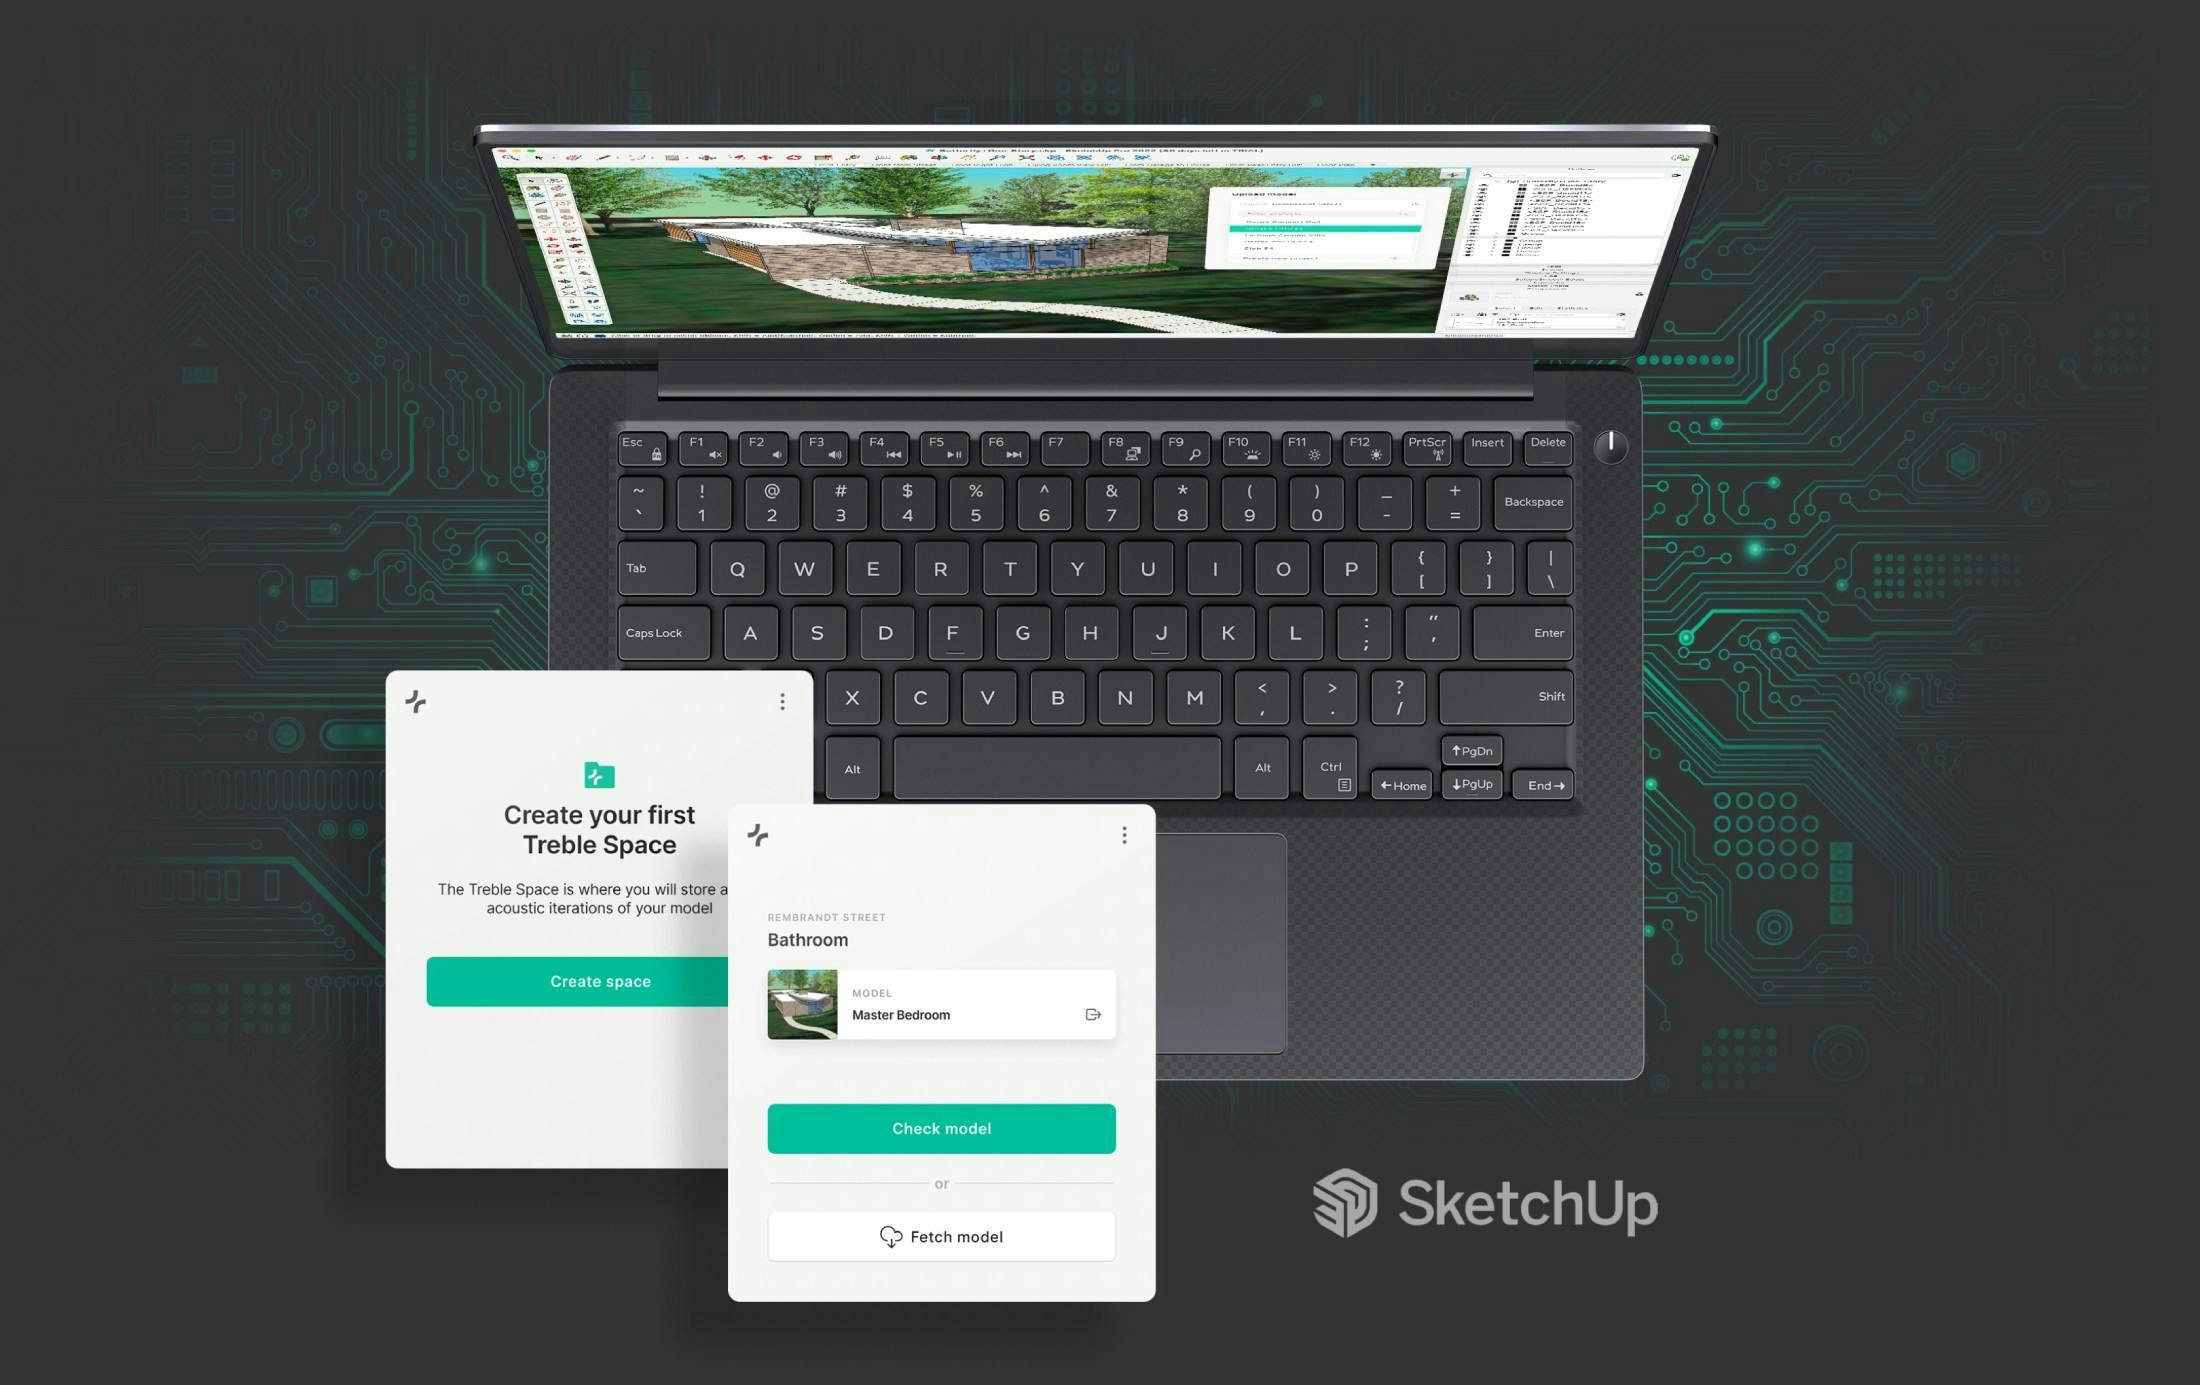 Live-link to sketchup